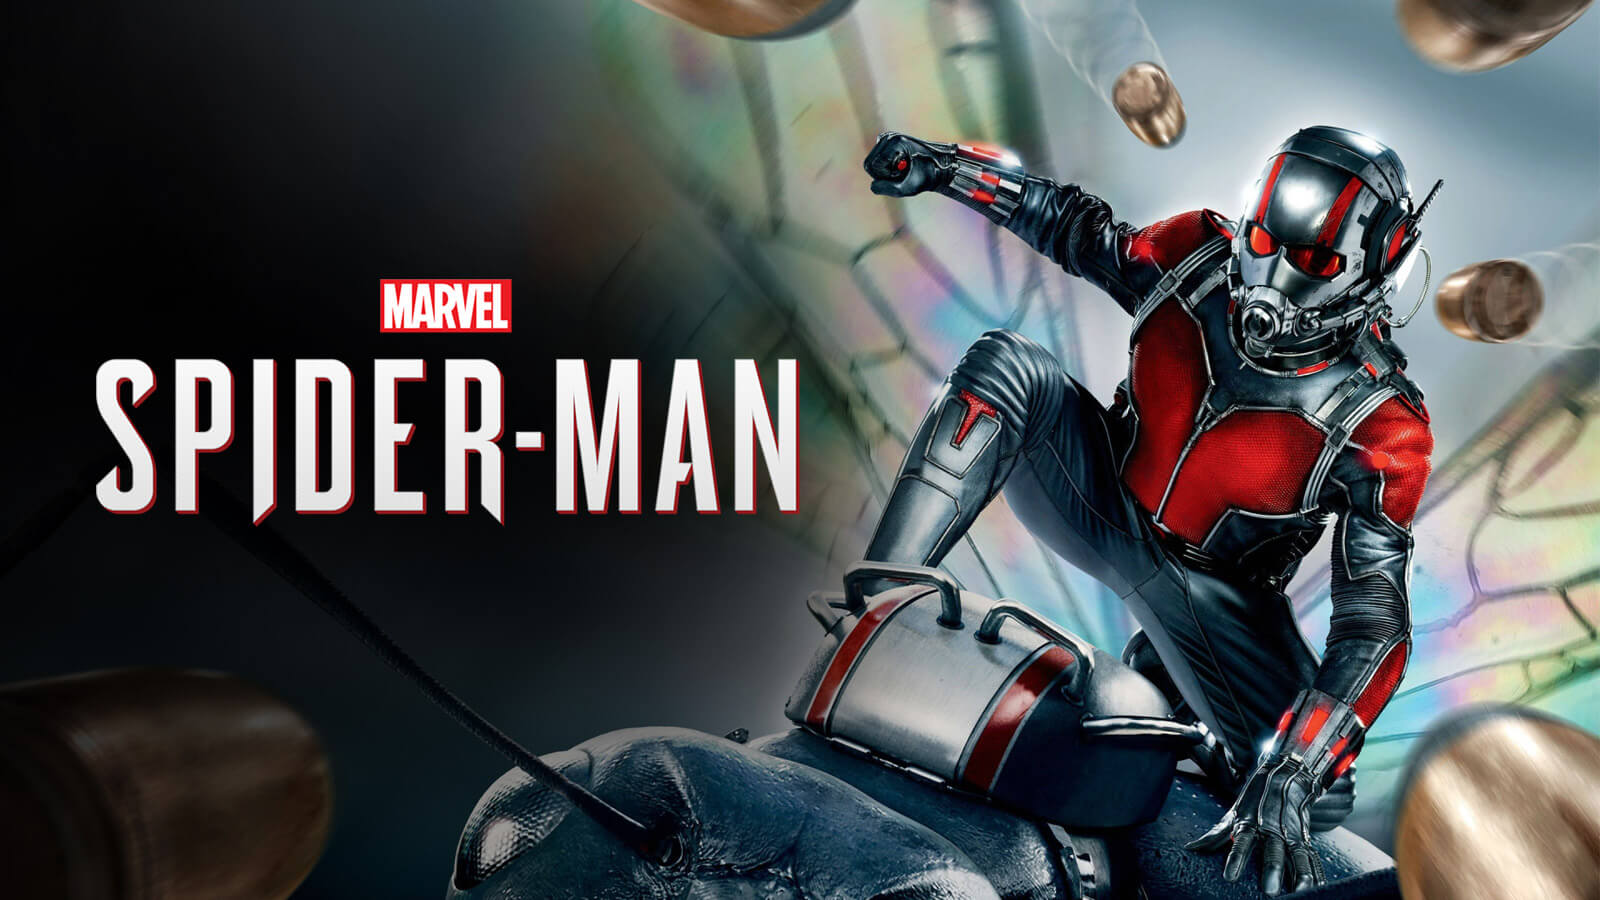 Spider-Man Easter Egg Refers to Ant-Man